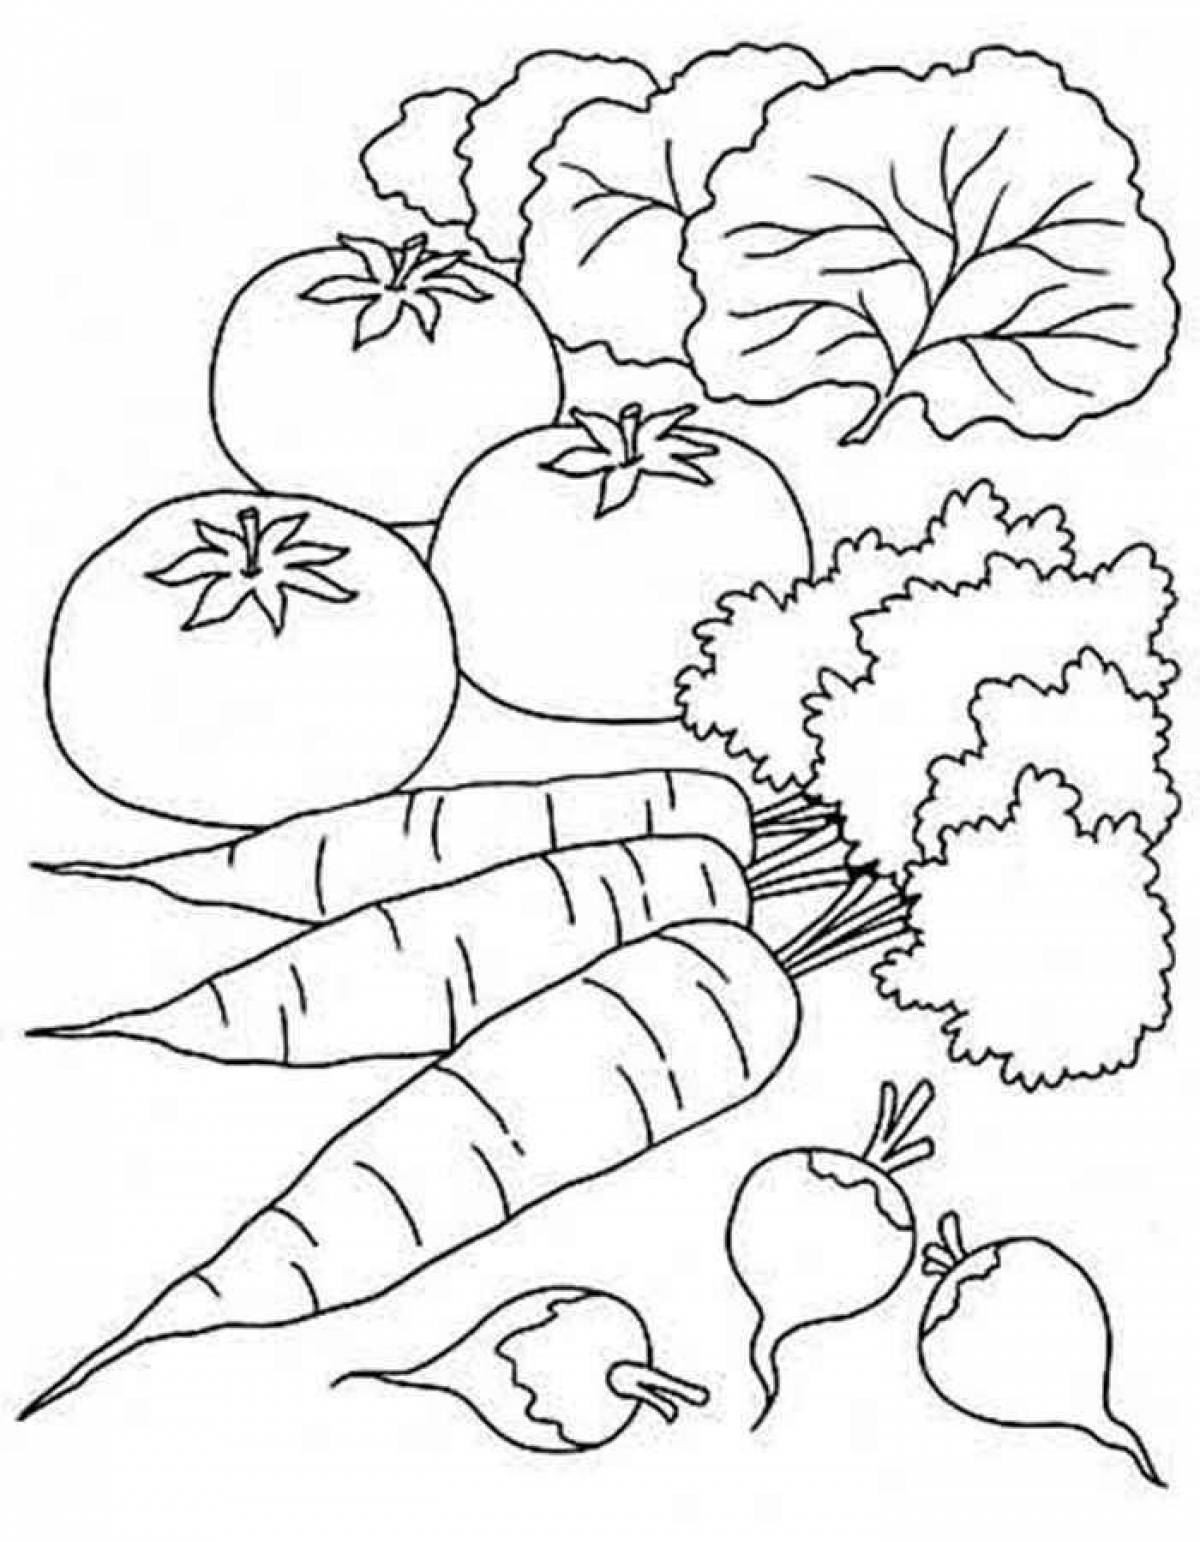 Bright vegetable coloring book for kids 6-7 years old